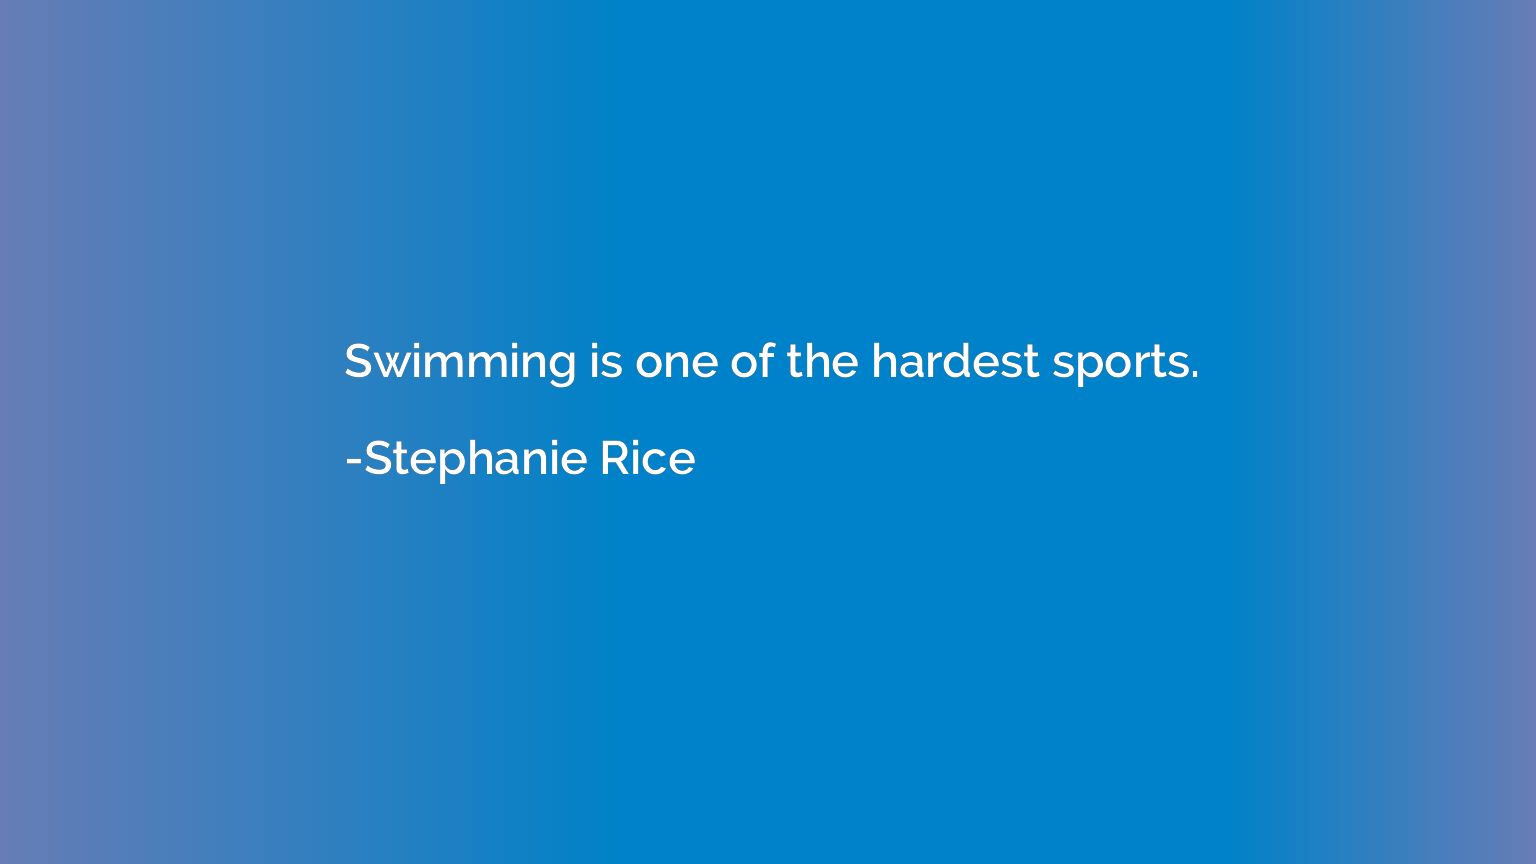 Swimming is one of the hardest sports.